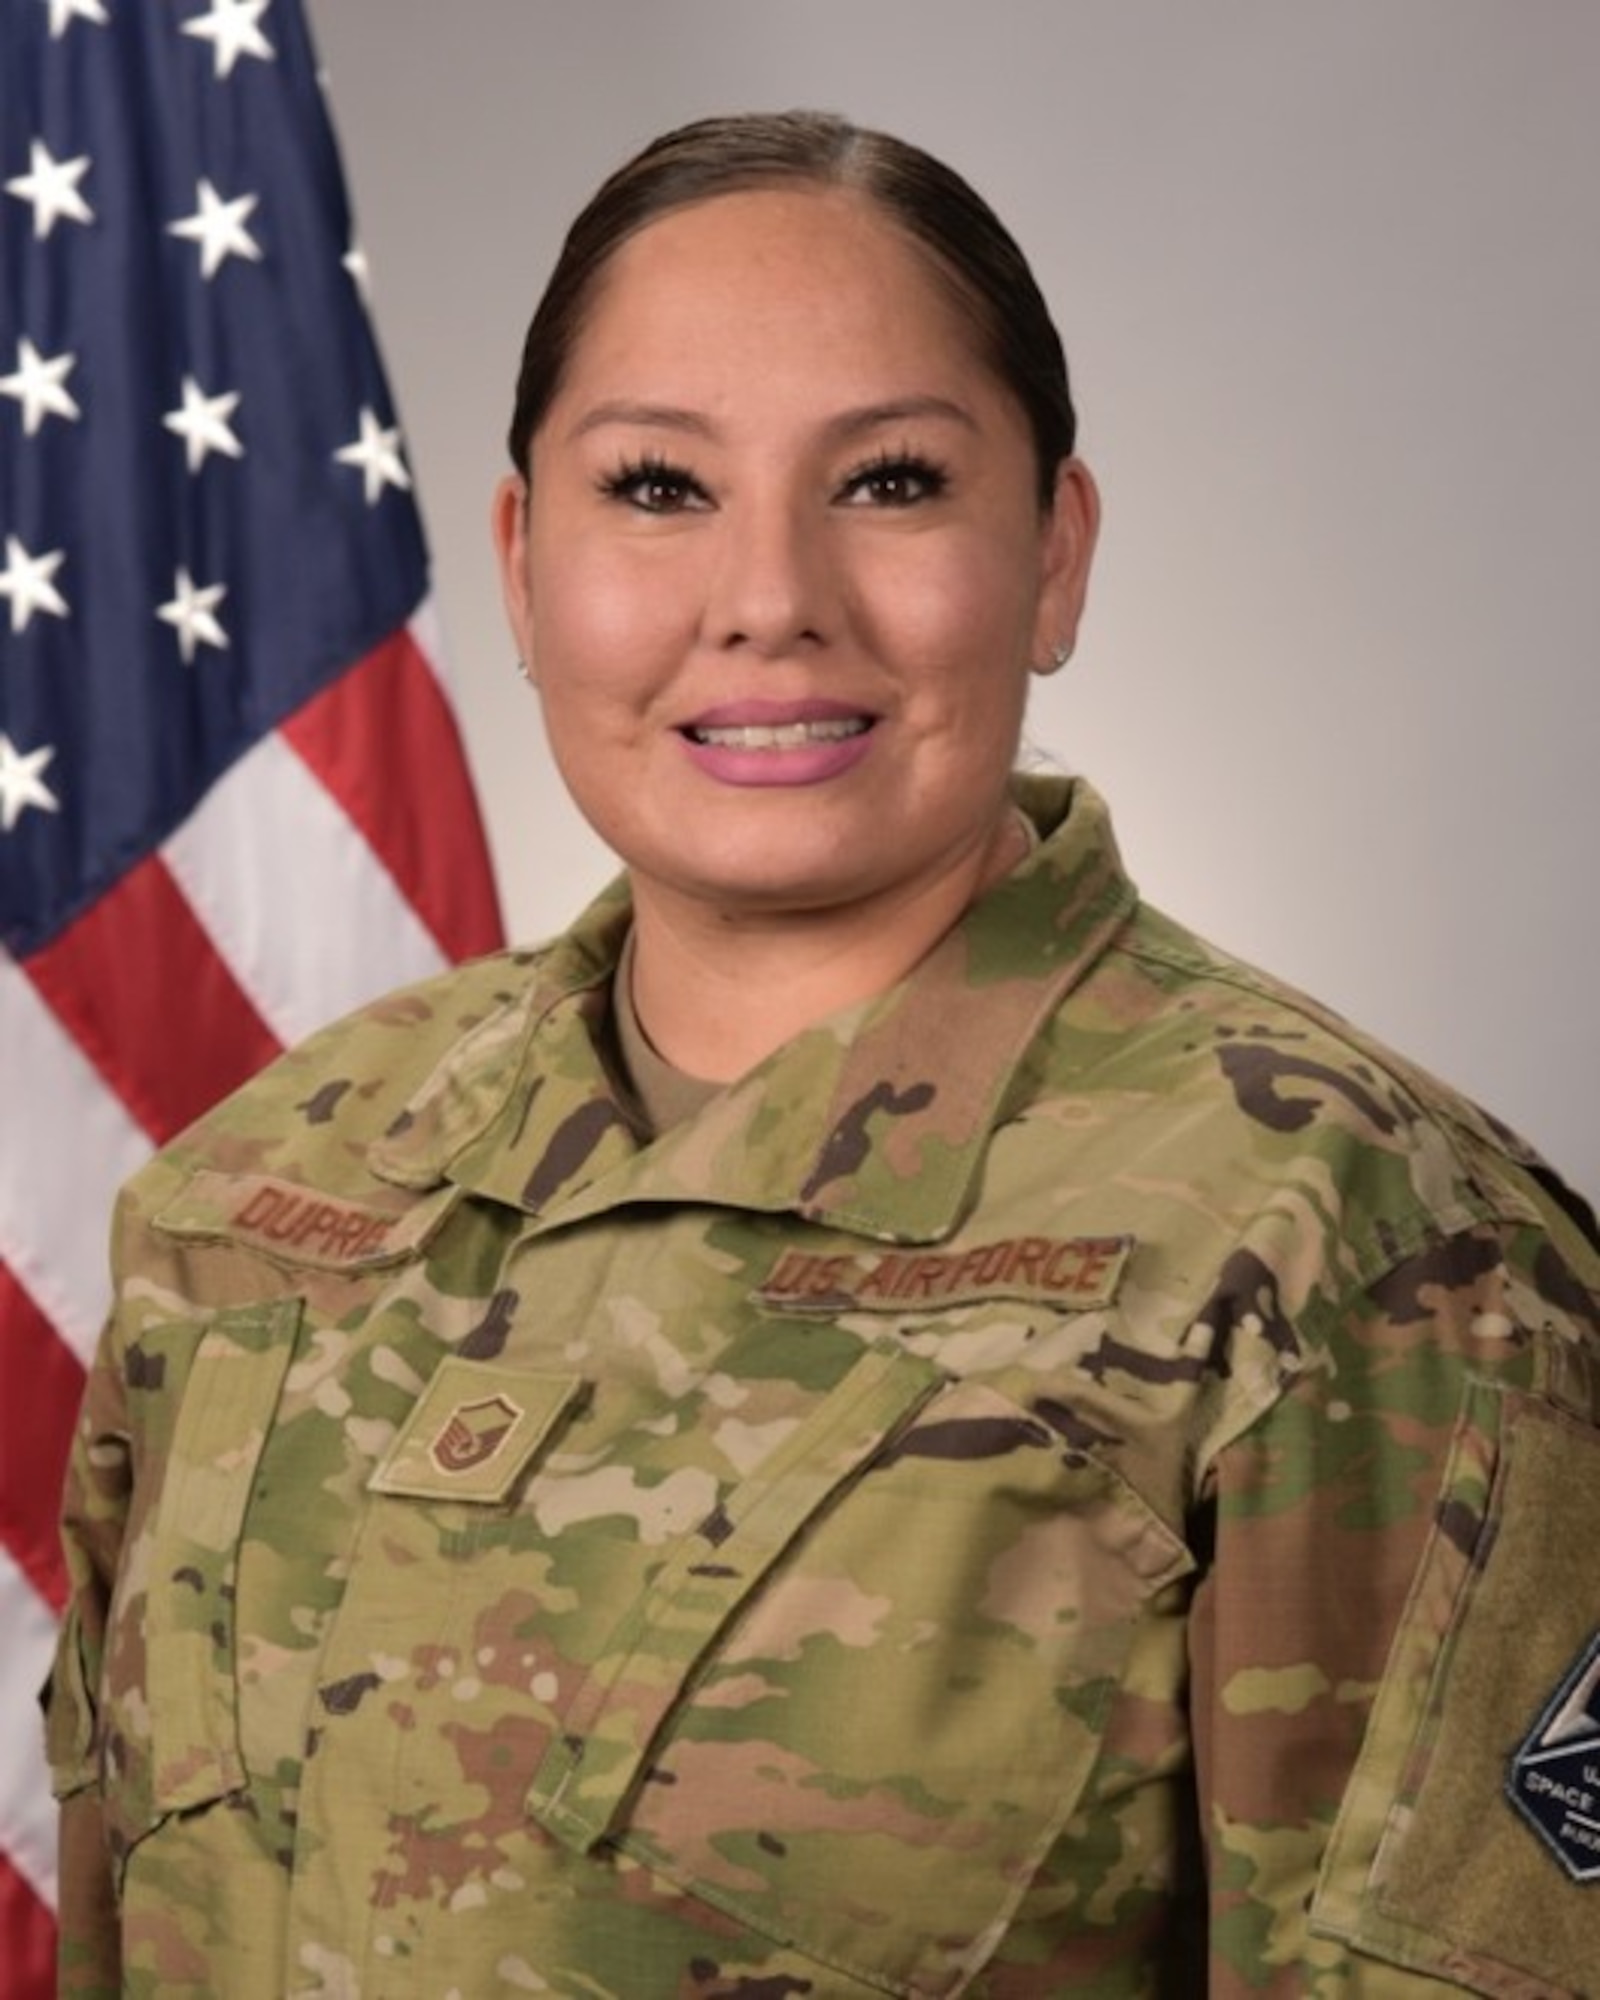 U.S. Space Force Master Sgt. Frances Dupris, an intelligence analyst, instructor, and Director of the Advanced Training Course at the 319th Combat Training Squadron, has received the Society of American Indian Government Employees (SAIGE) Military Meritorious Service Award for the second time.